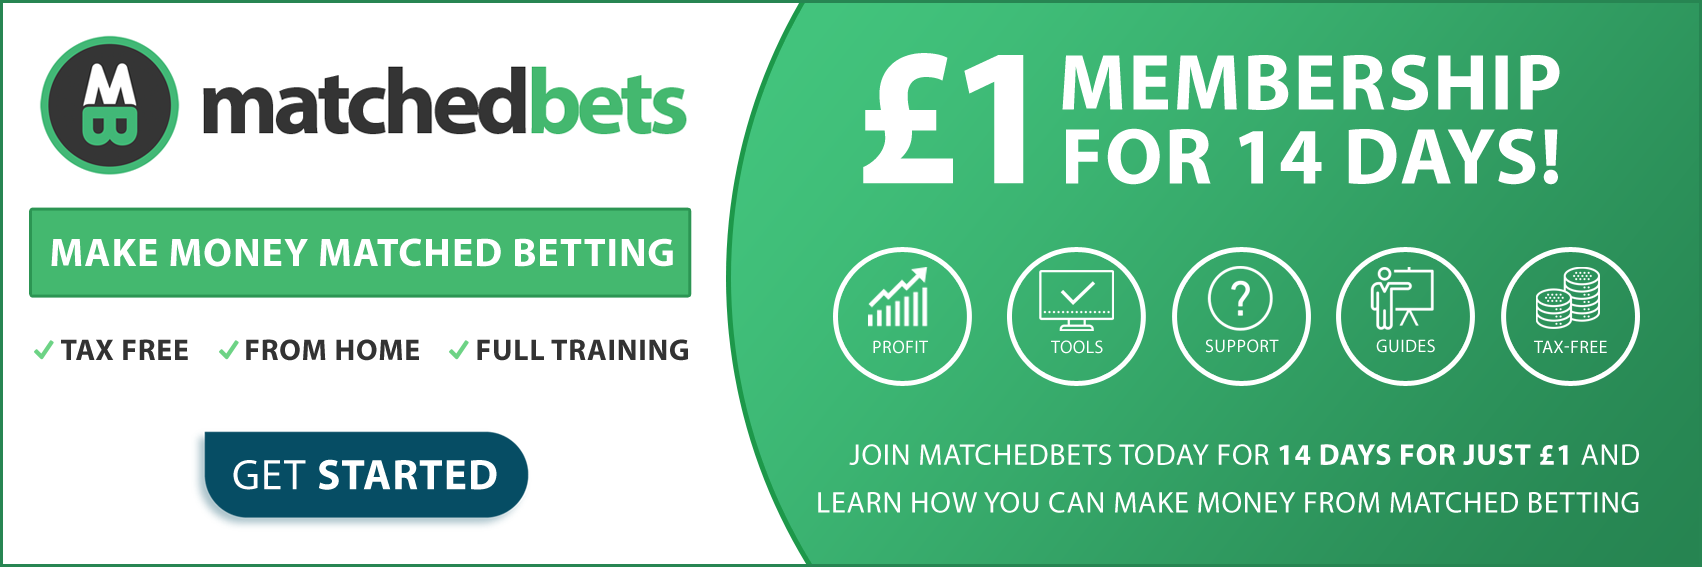 Make Money Online with MatchedBets.com